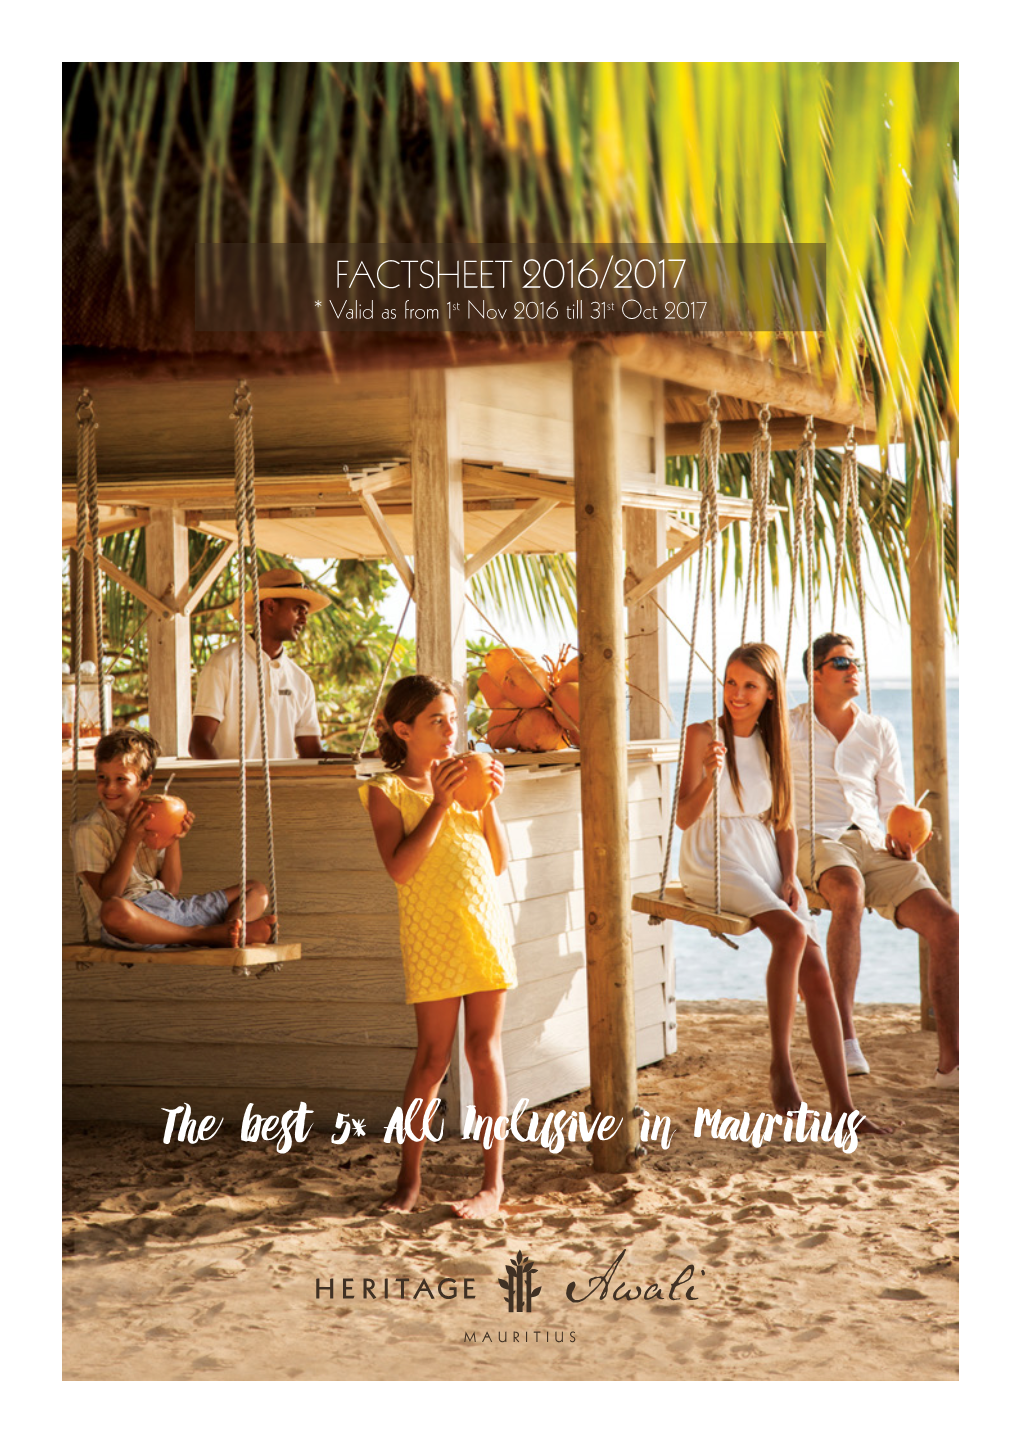 The Best 5* All Inclusive in Mauritius HERITAGE AWALI the BEST 5* ALL INCLUSIVE in MAURITIUS